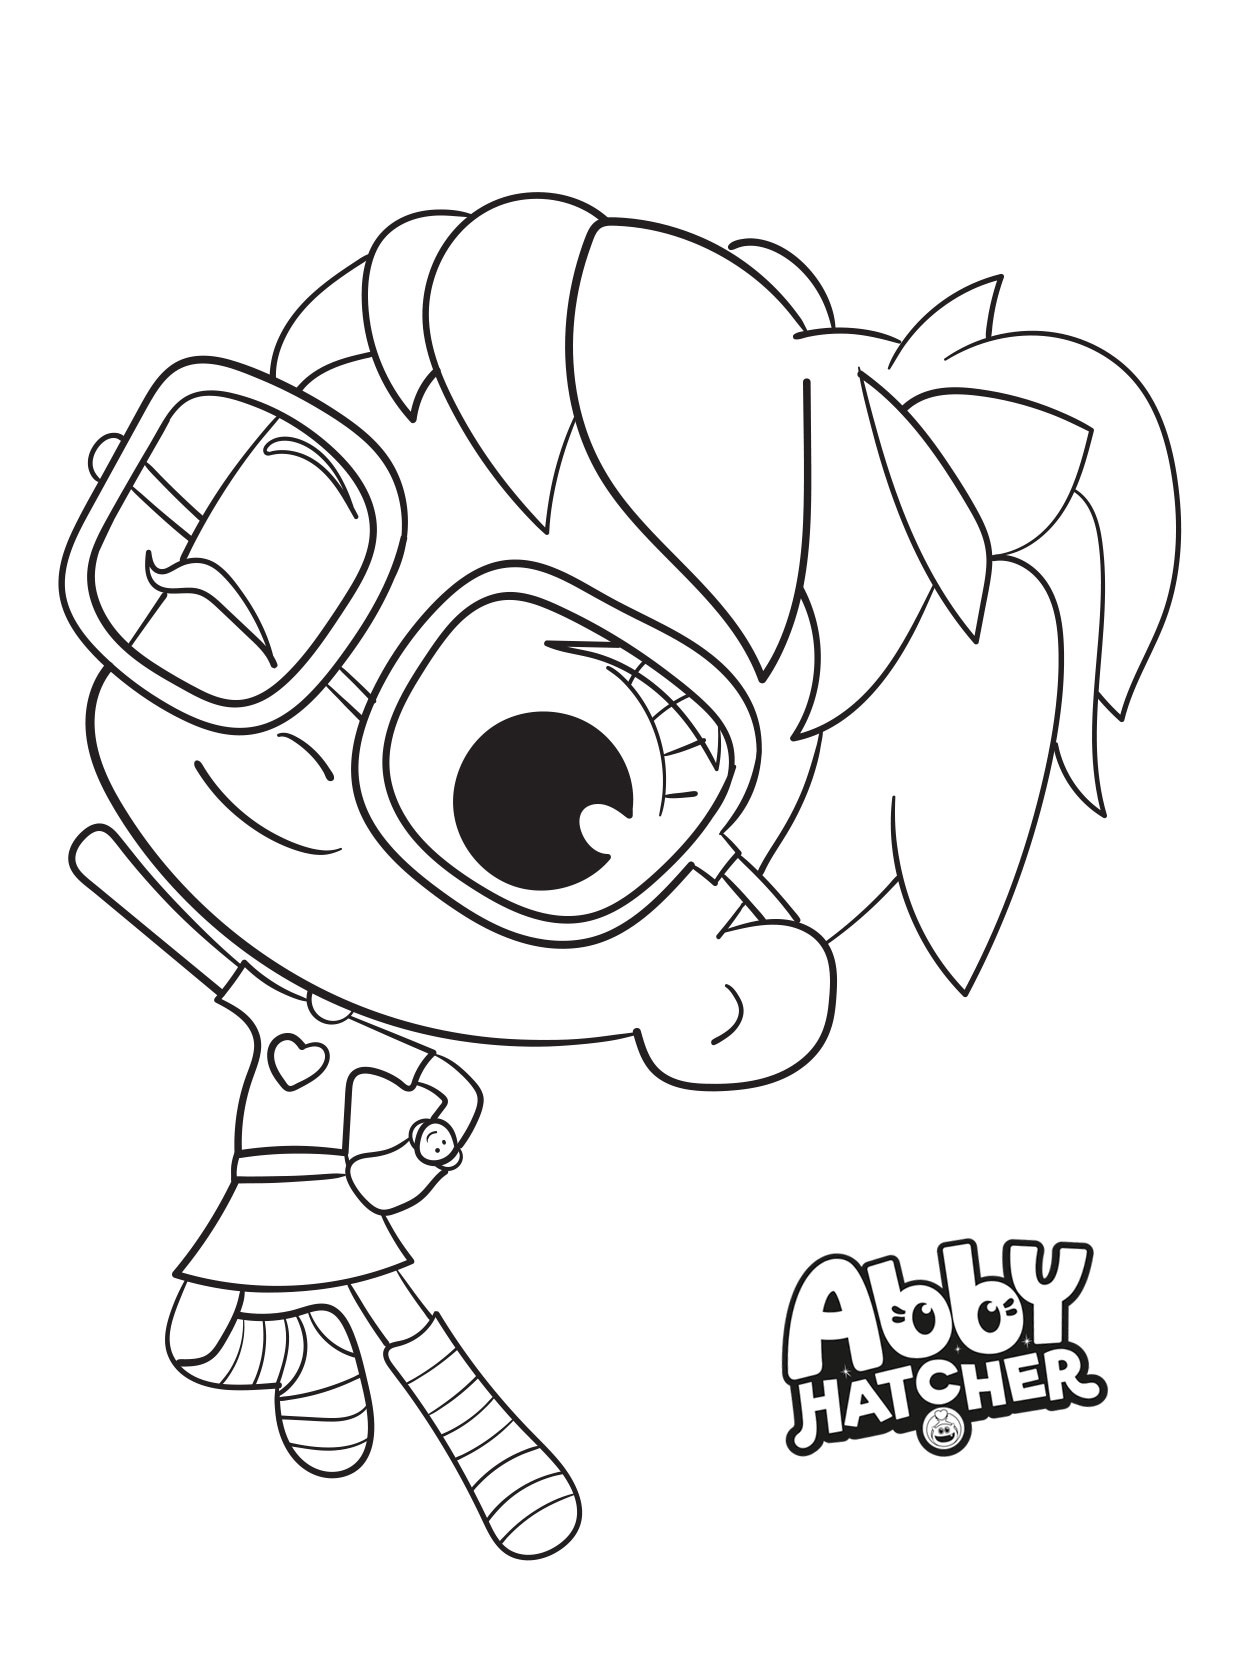 Printable Abby Hatcher Coloring Pages Pdf For Kids - Abby Hatcher Jumping Coloring Page